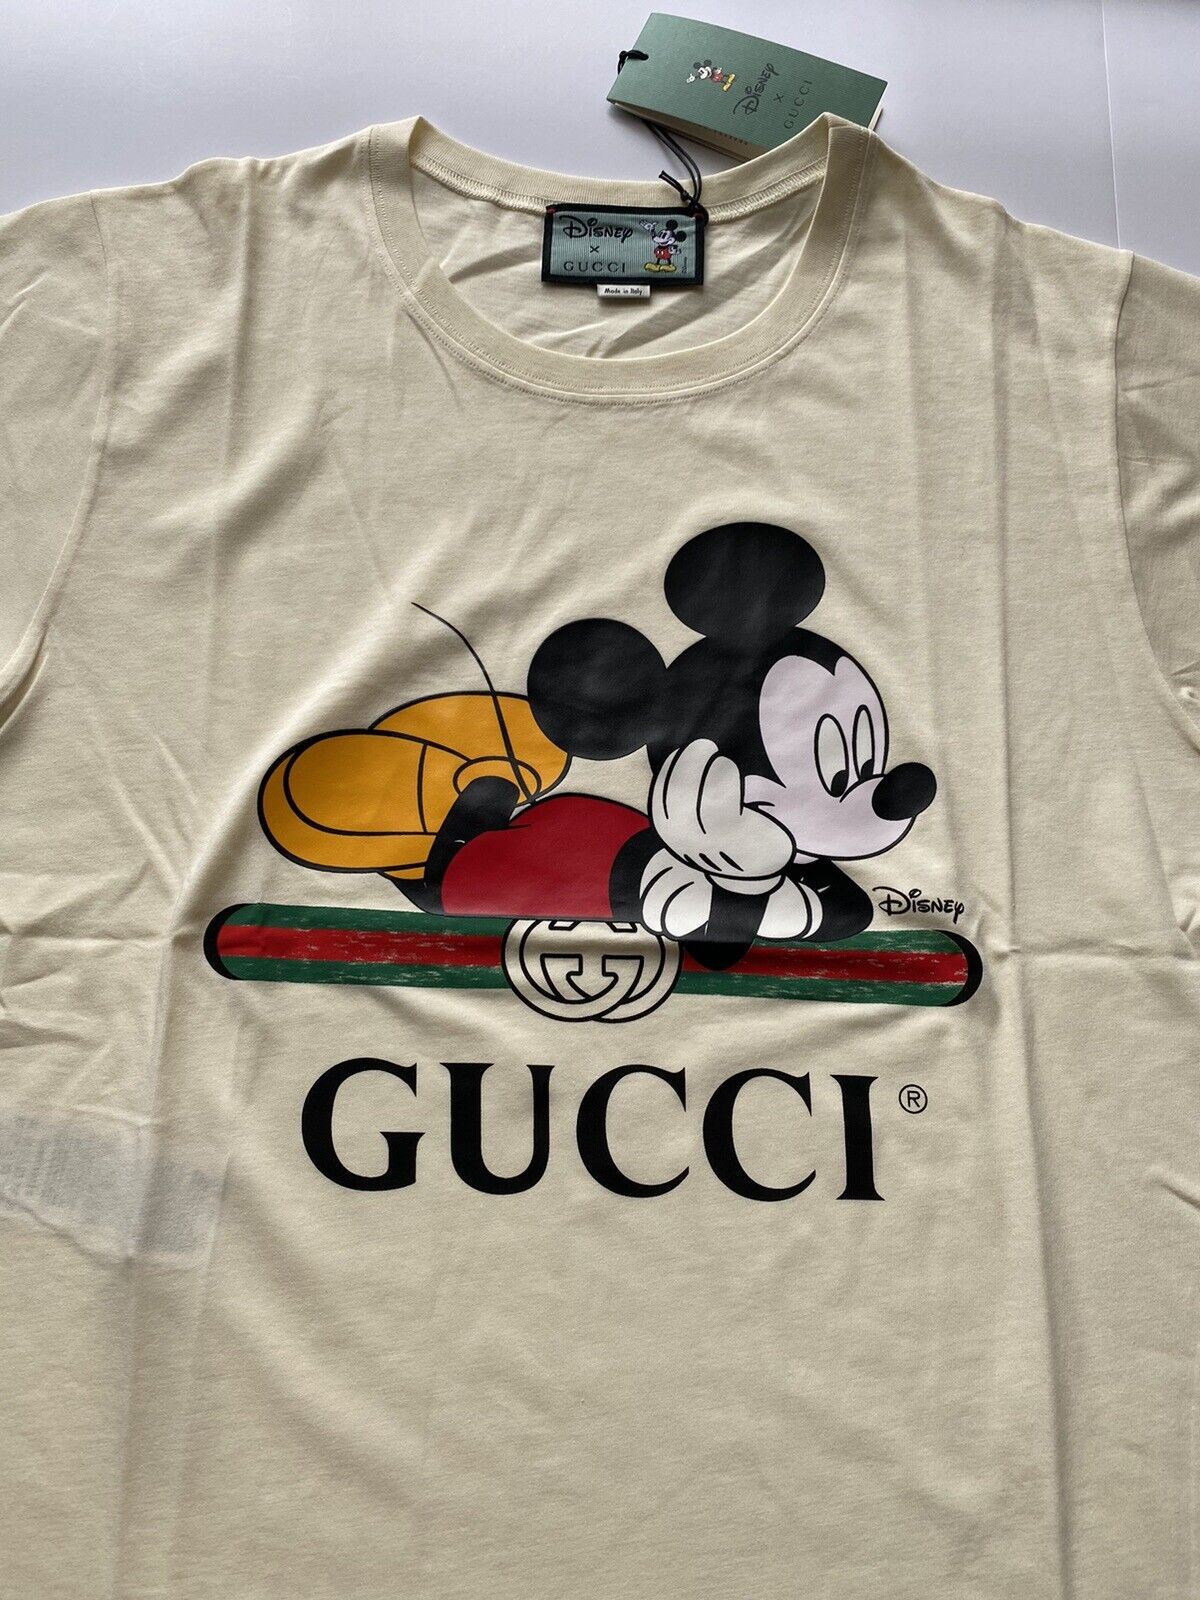 NWT Gucci Mickey Mouse Tan Cotton Jersey T-Shirt Small 492347 Italy